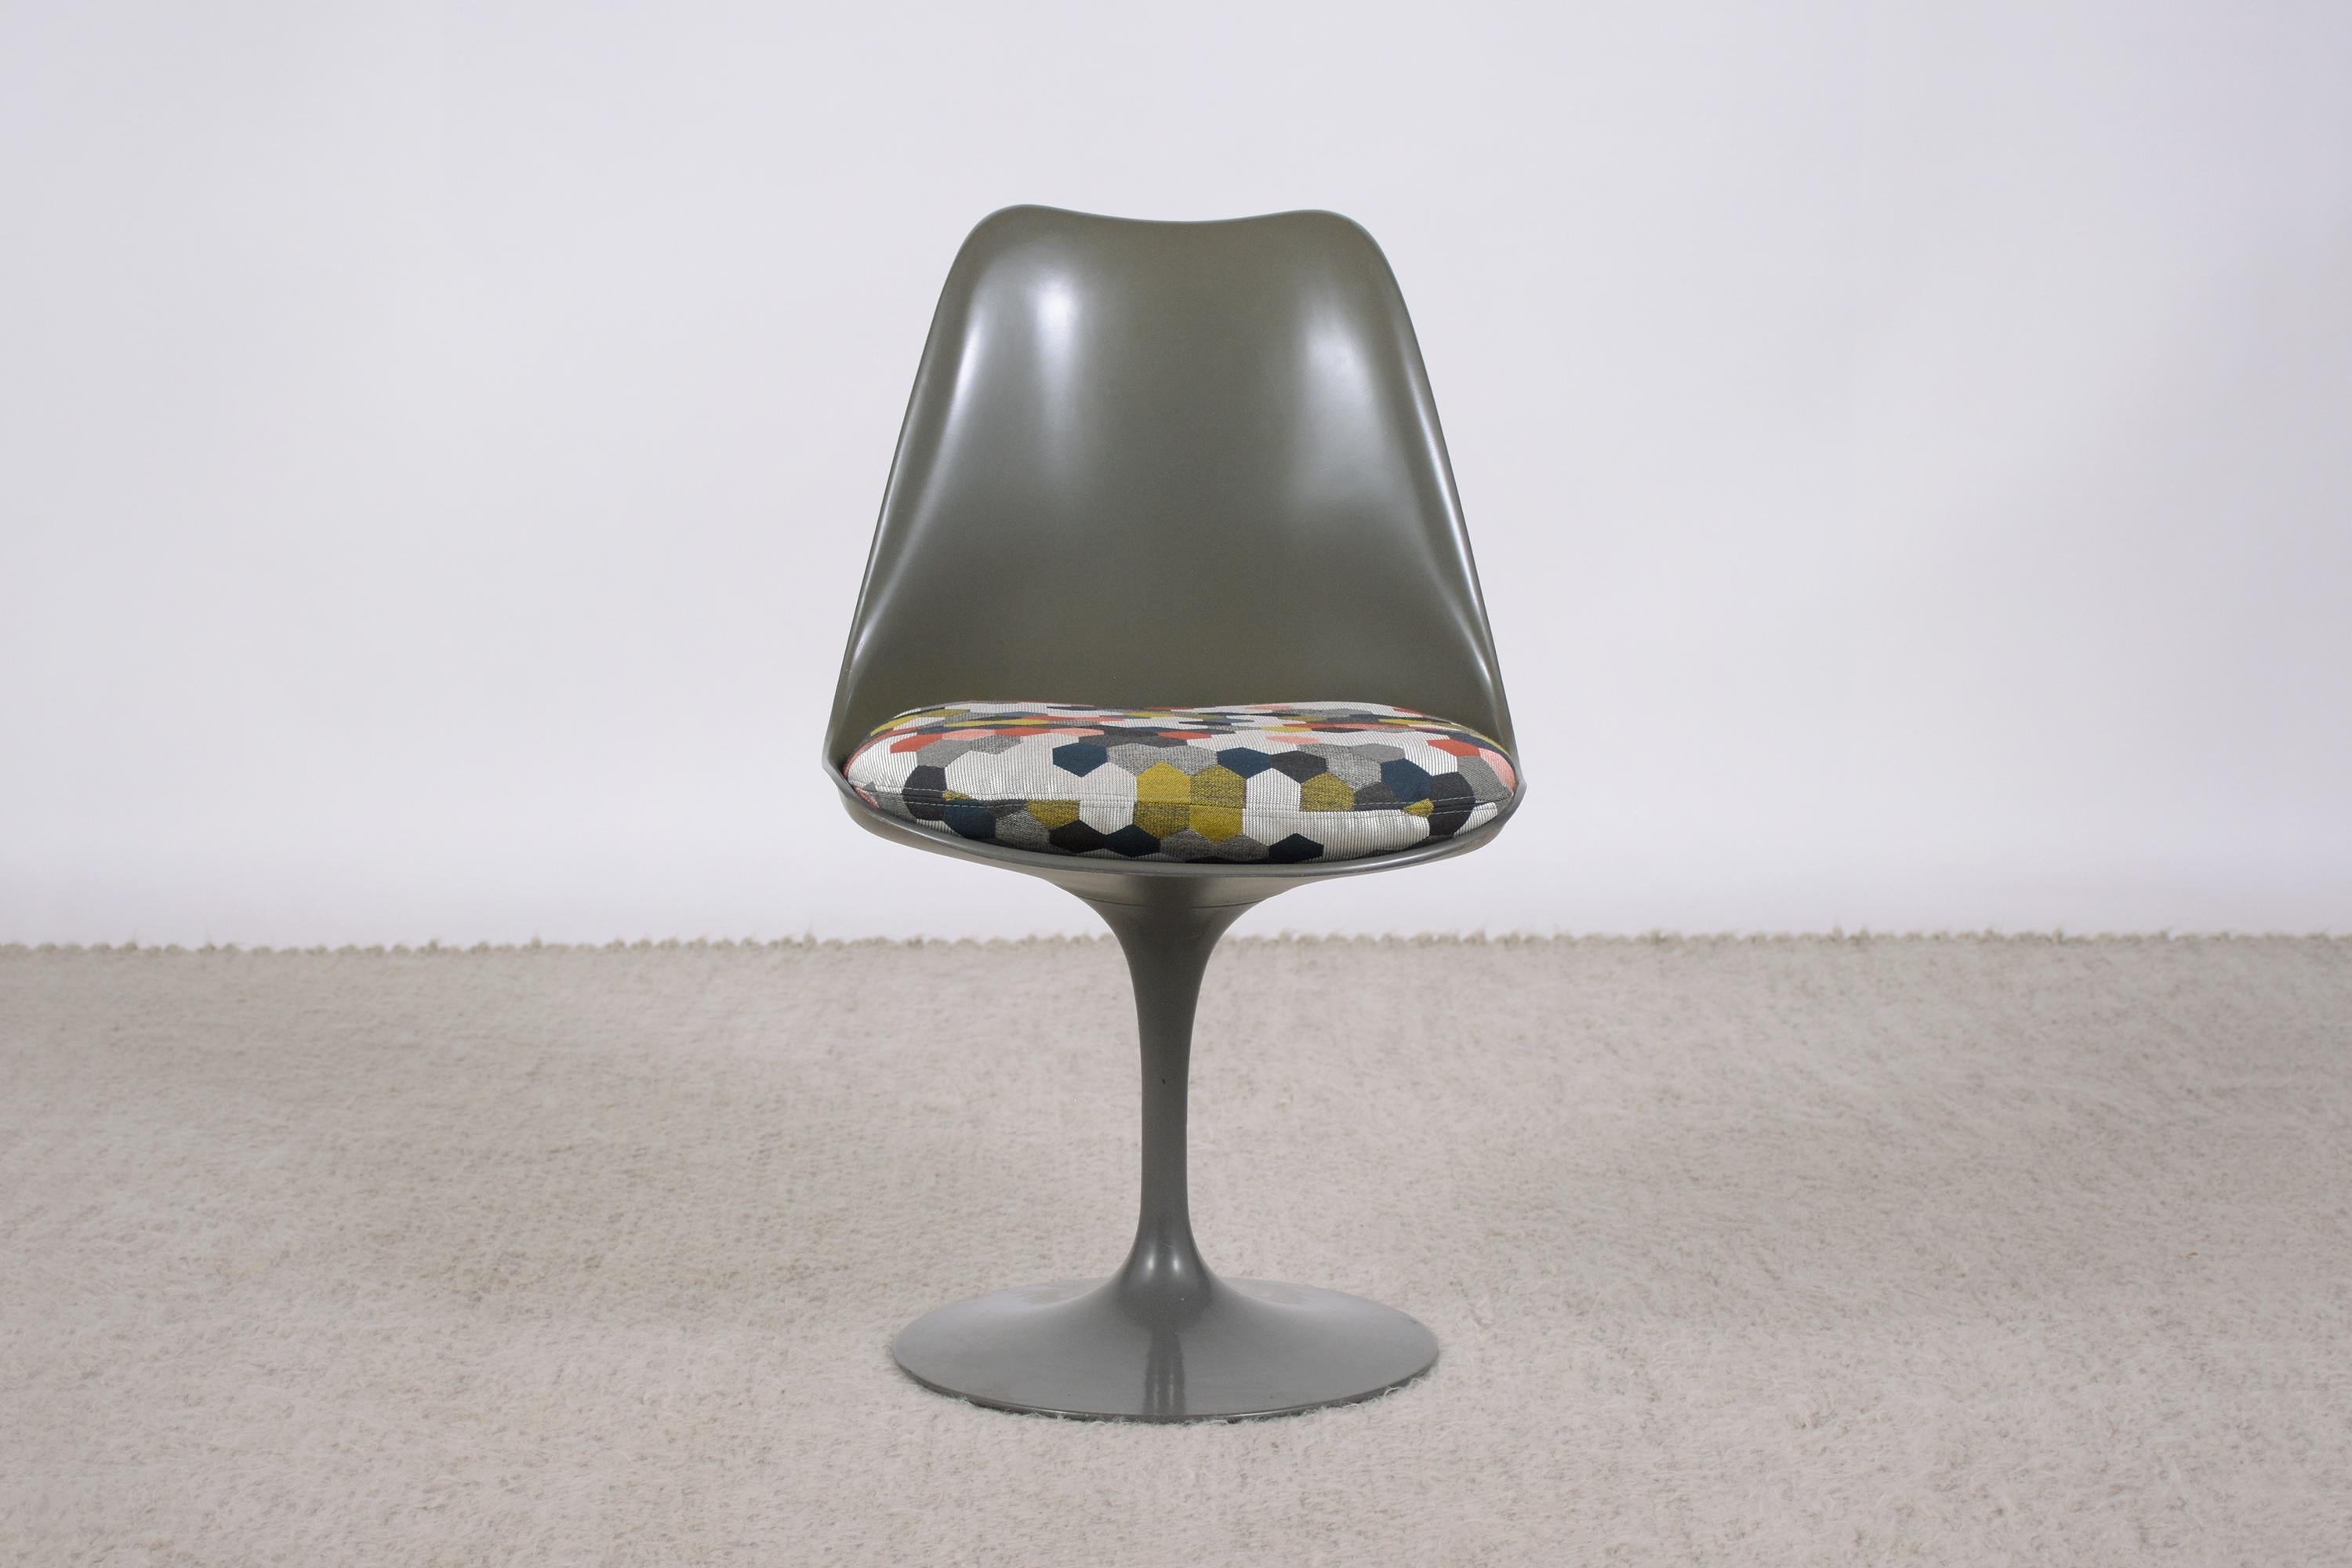 This vintage chair from the 'Tulip' collection was designed by Eero Saarinen for Knoll International is in great condition and has a newly upholstered seat cushion. This iconic tulip pedestal set is designed by Eero Saarinen in the 1950s and it took